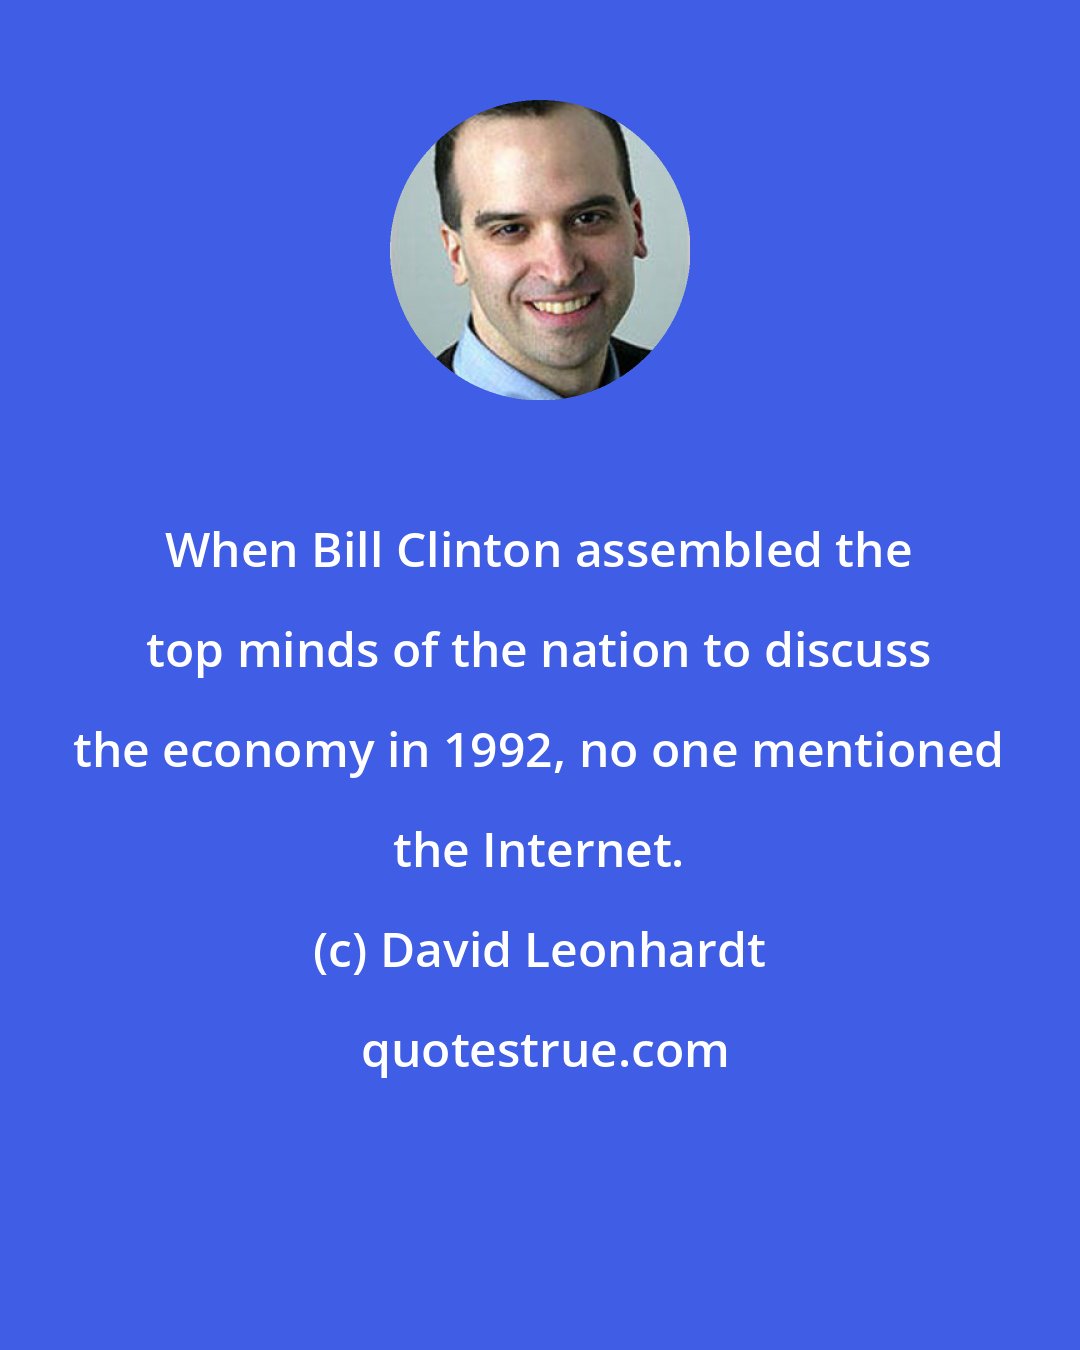 David Leonhardt: When Bill Clinton assembled the top minds of the nation to discuss the economy in 1992, no one mentioned the Internet.